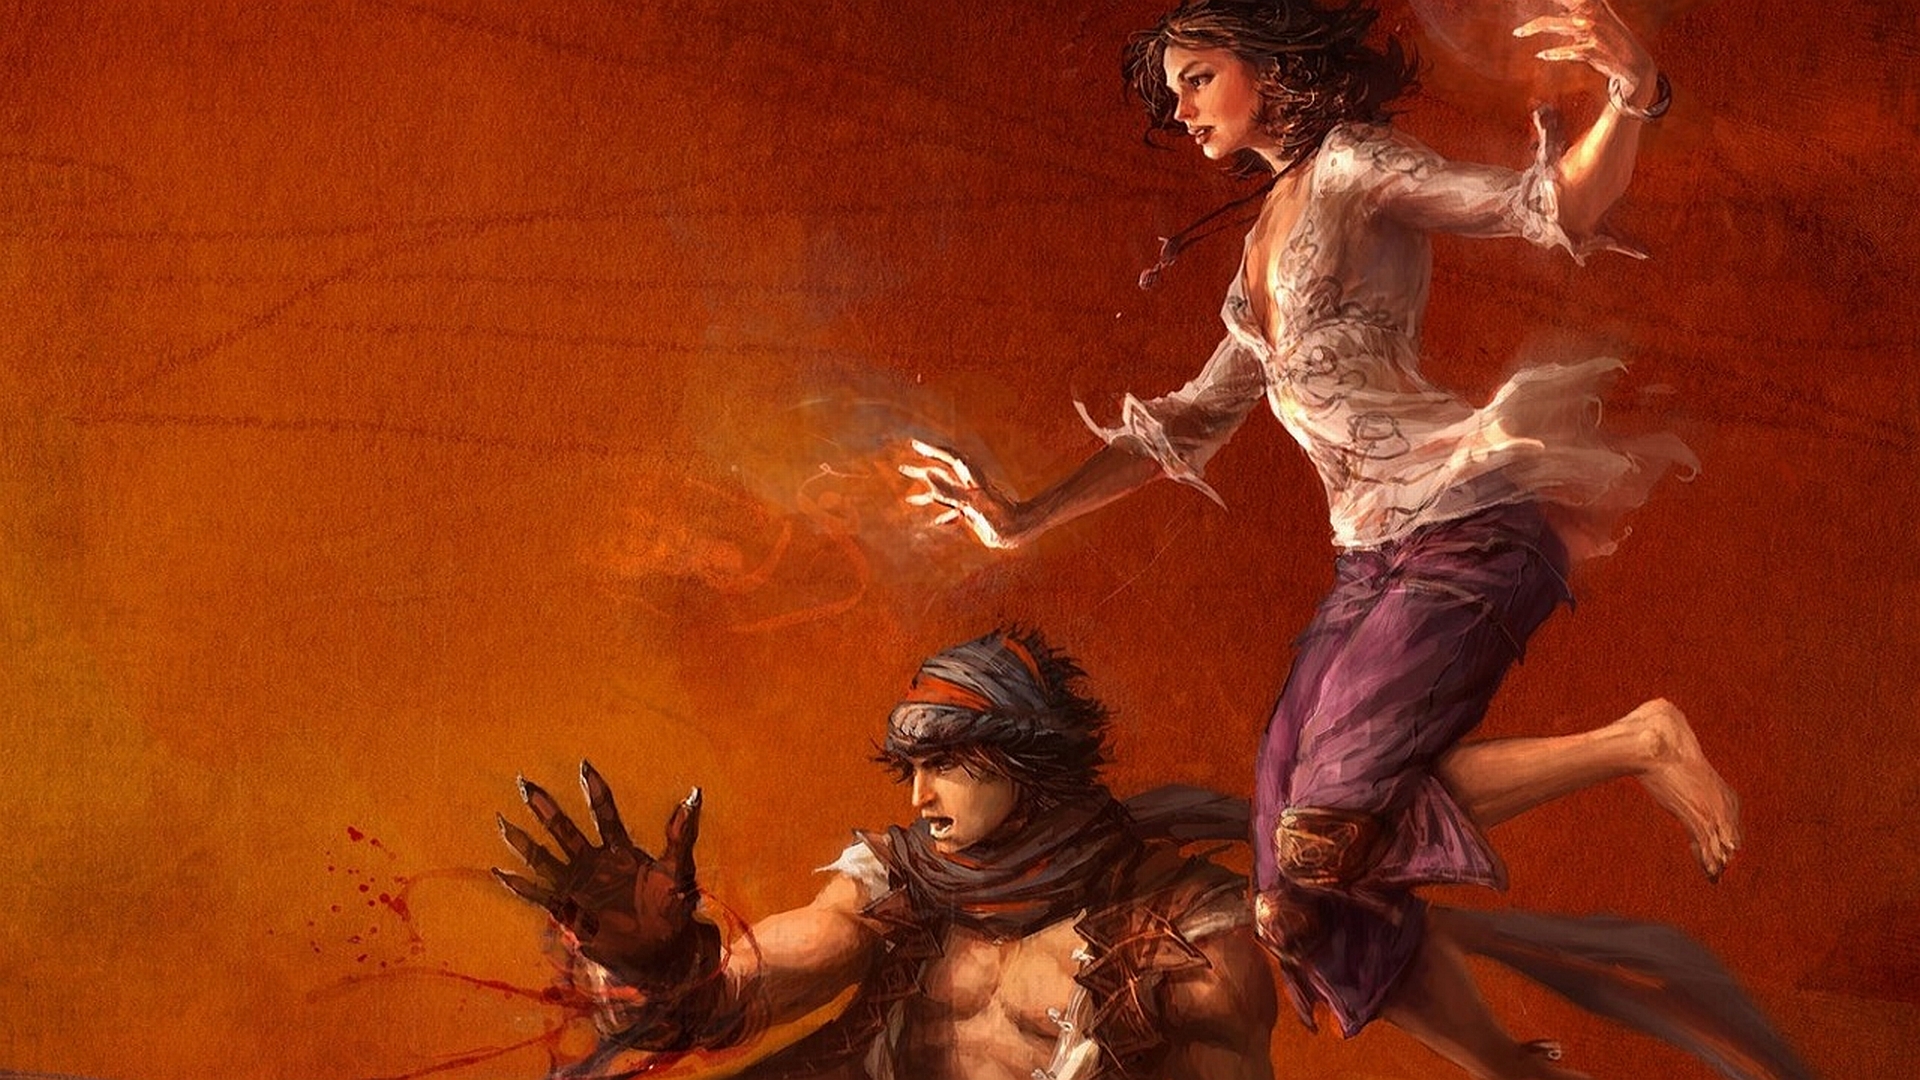 Video Game Prince Of Persia 1920x1080